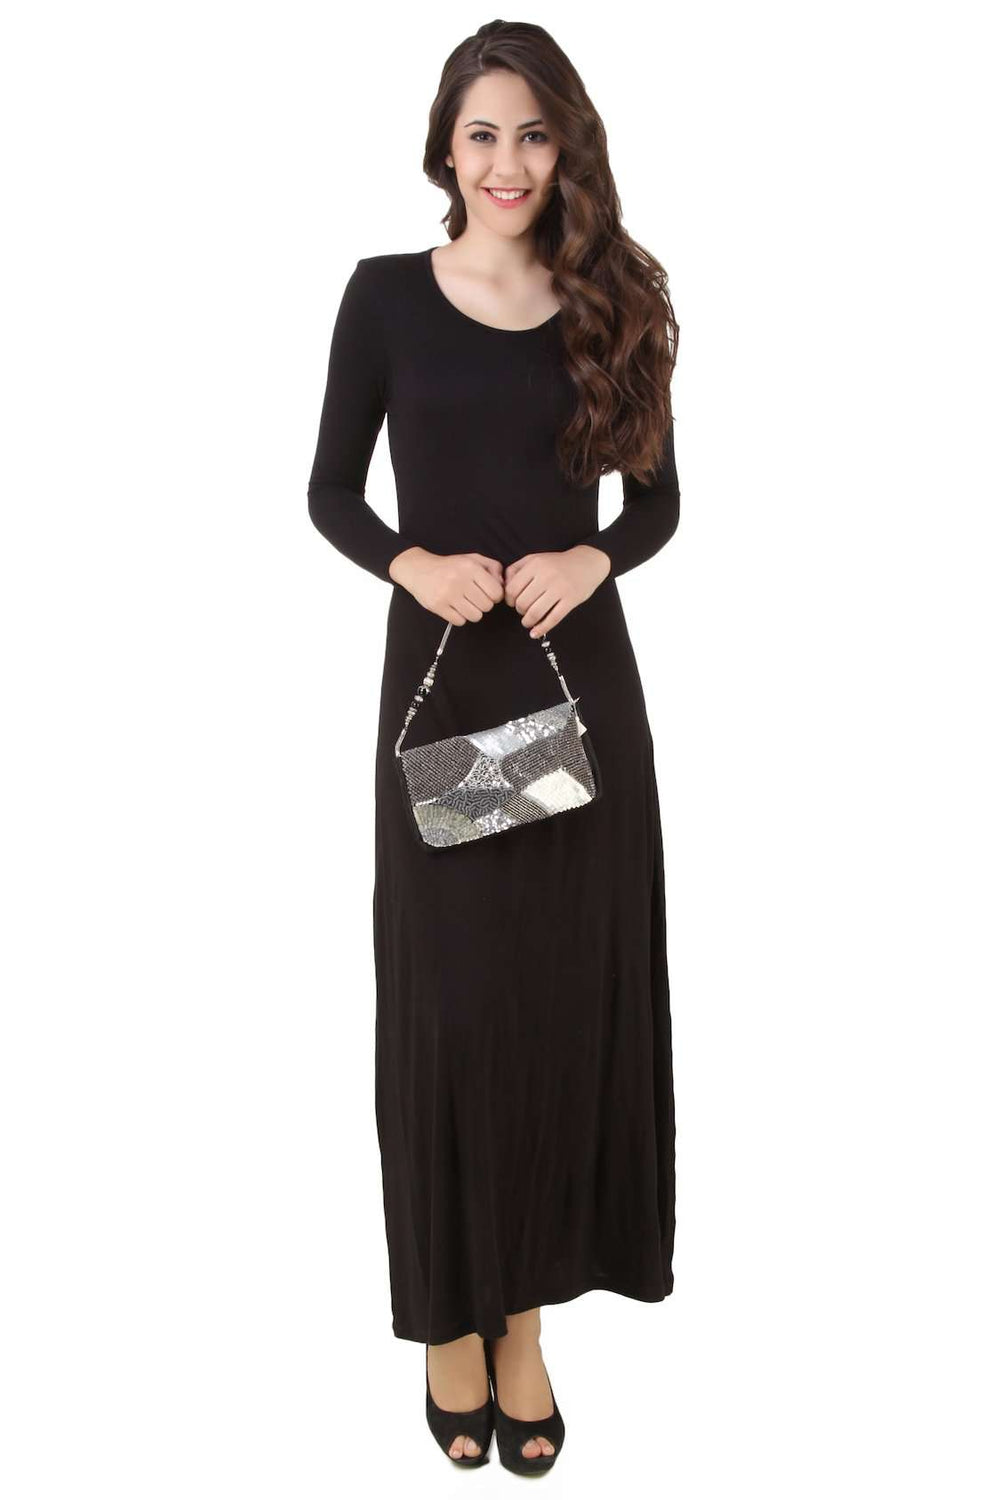 Madeline Black and Silver Clutch Bag